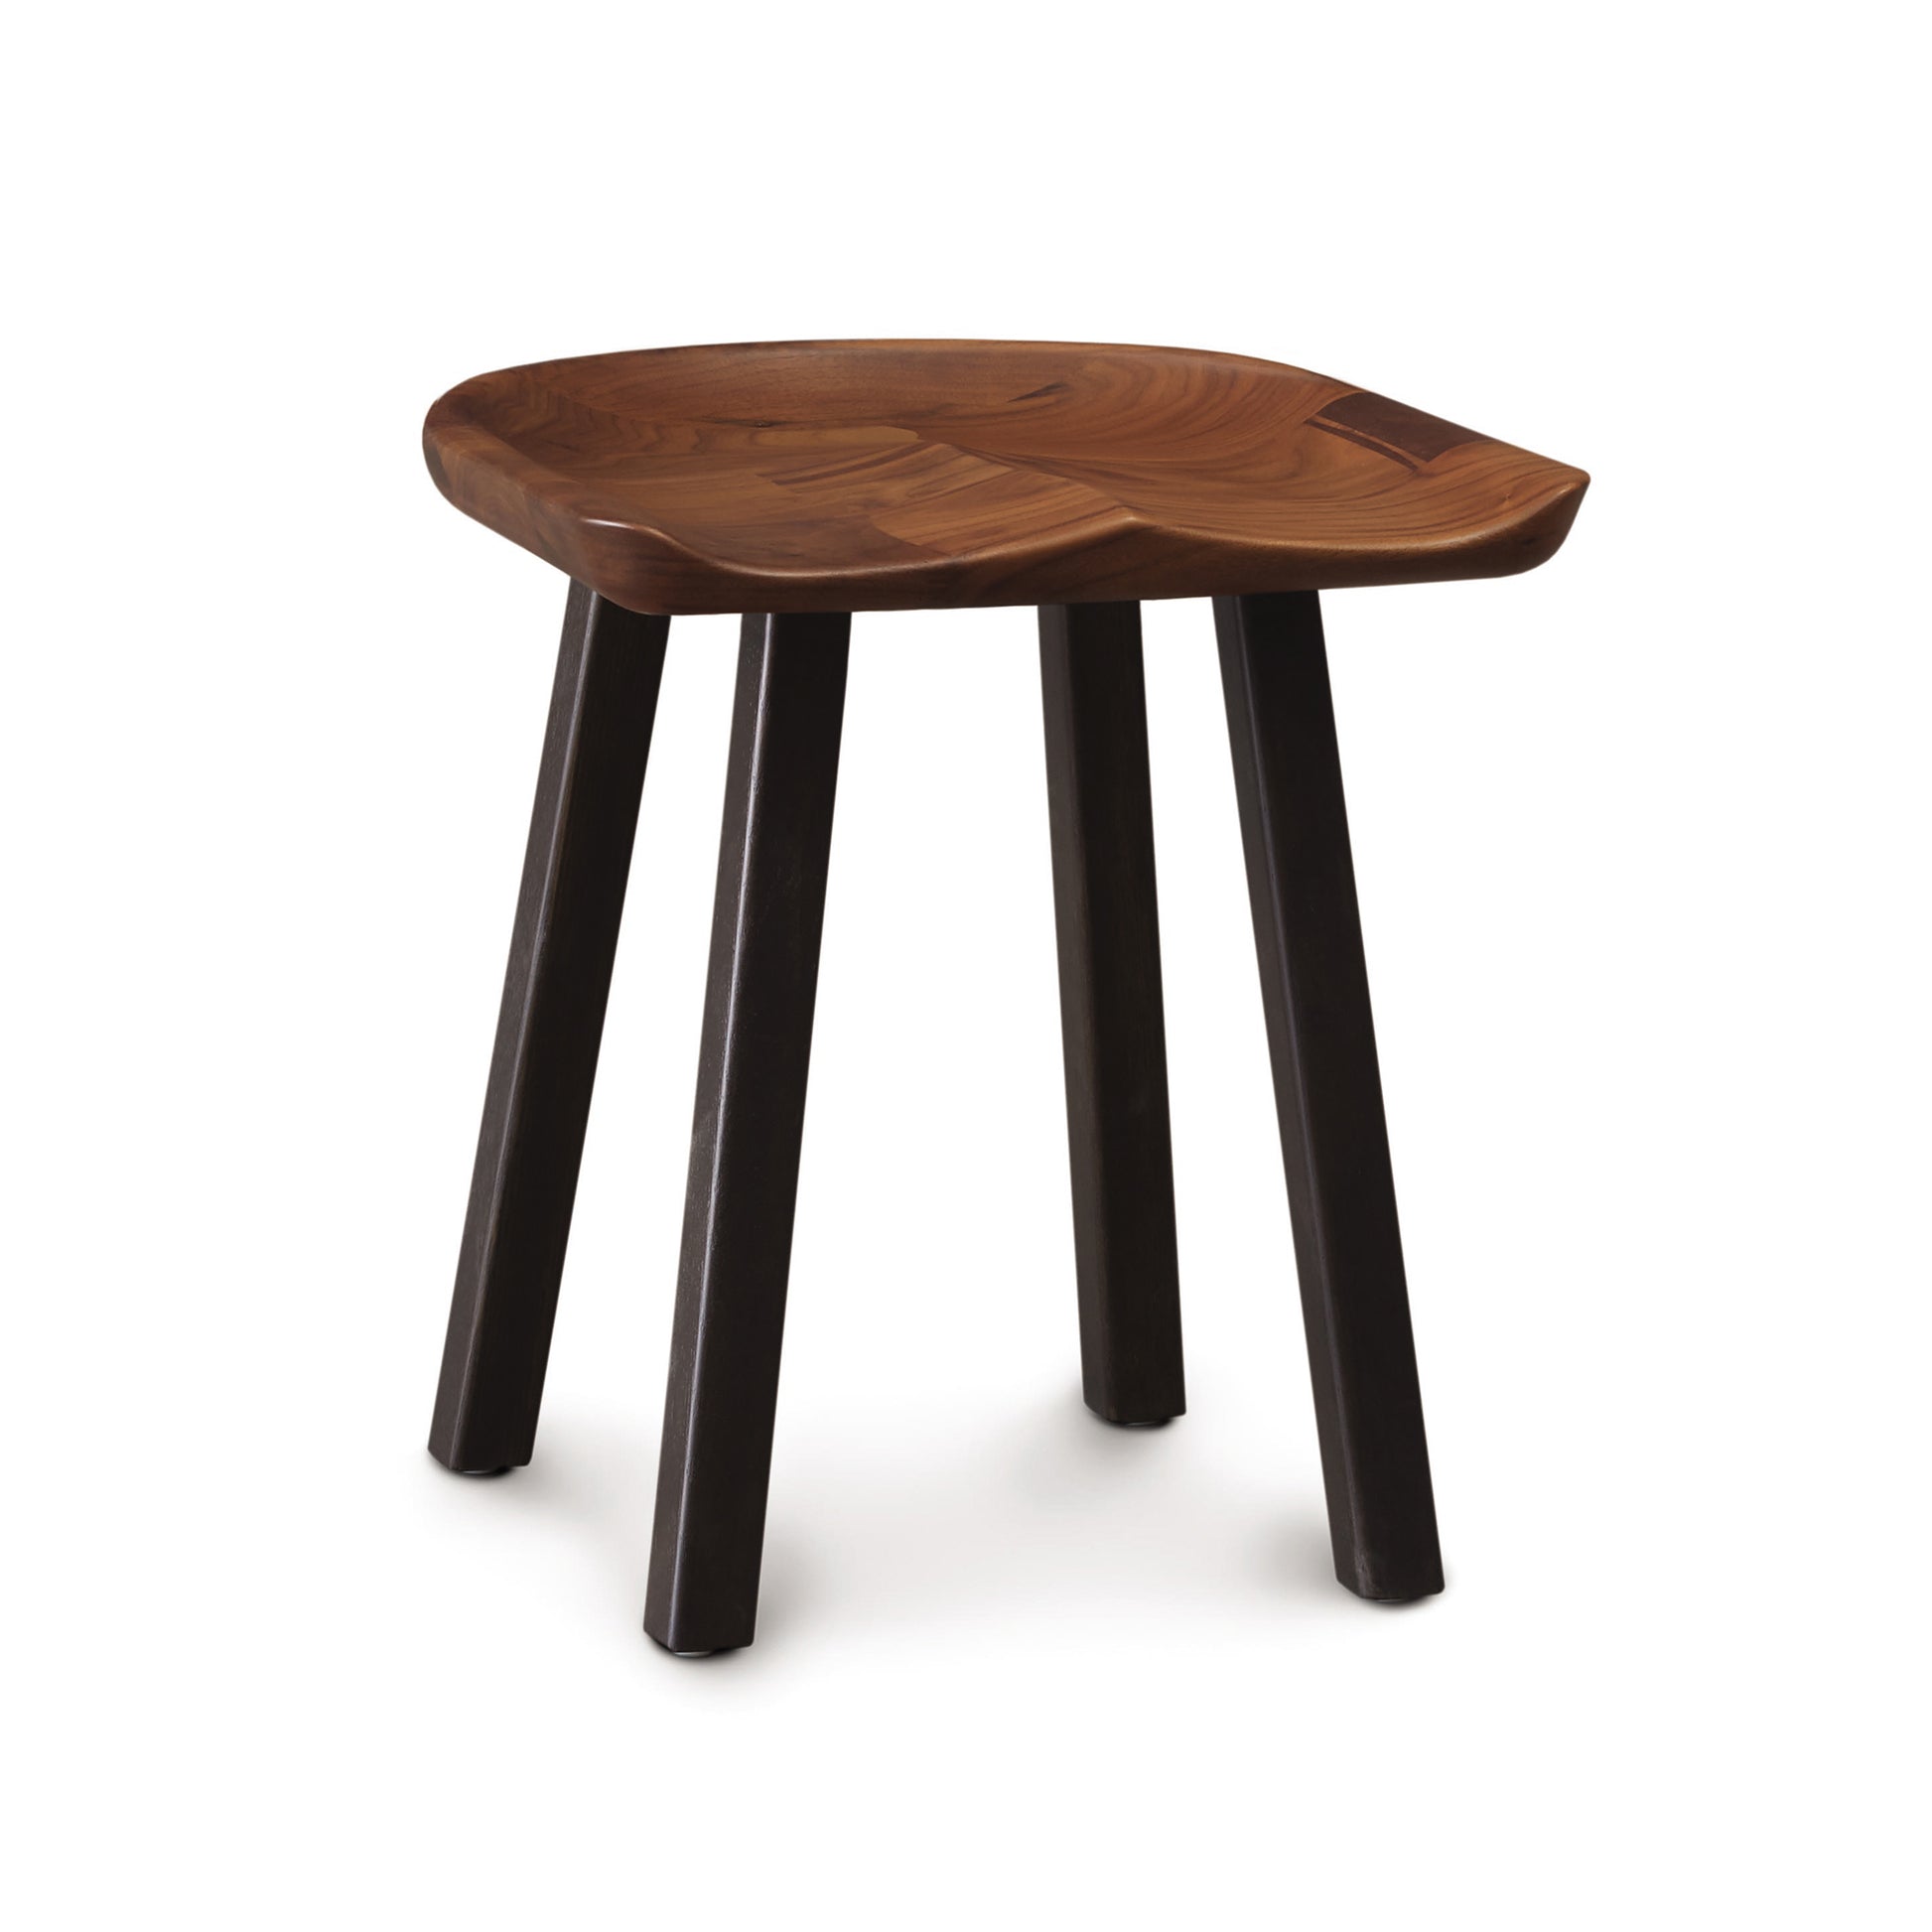 A wooden stool with black legs on a white background.